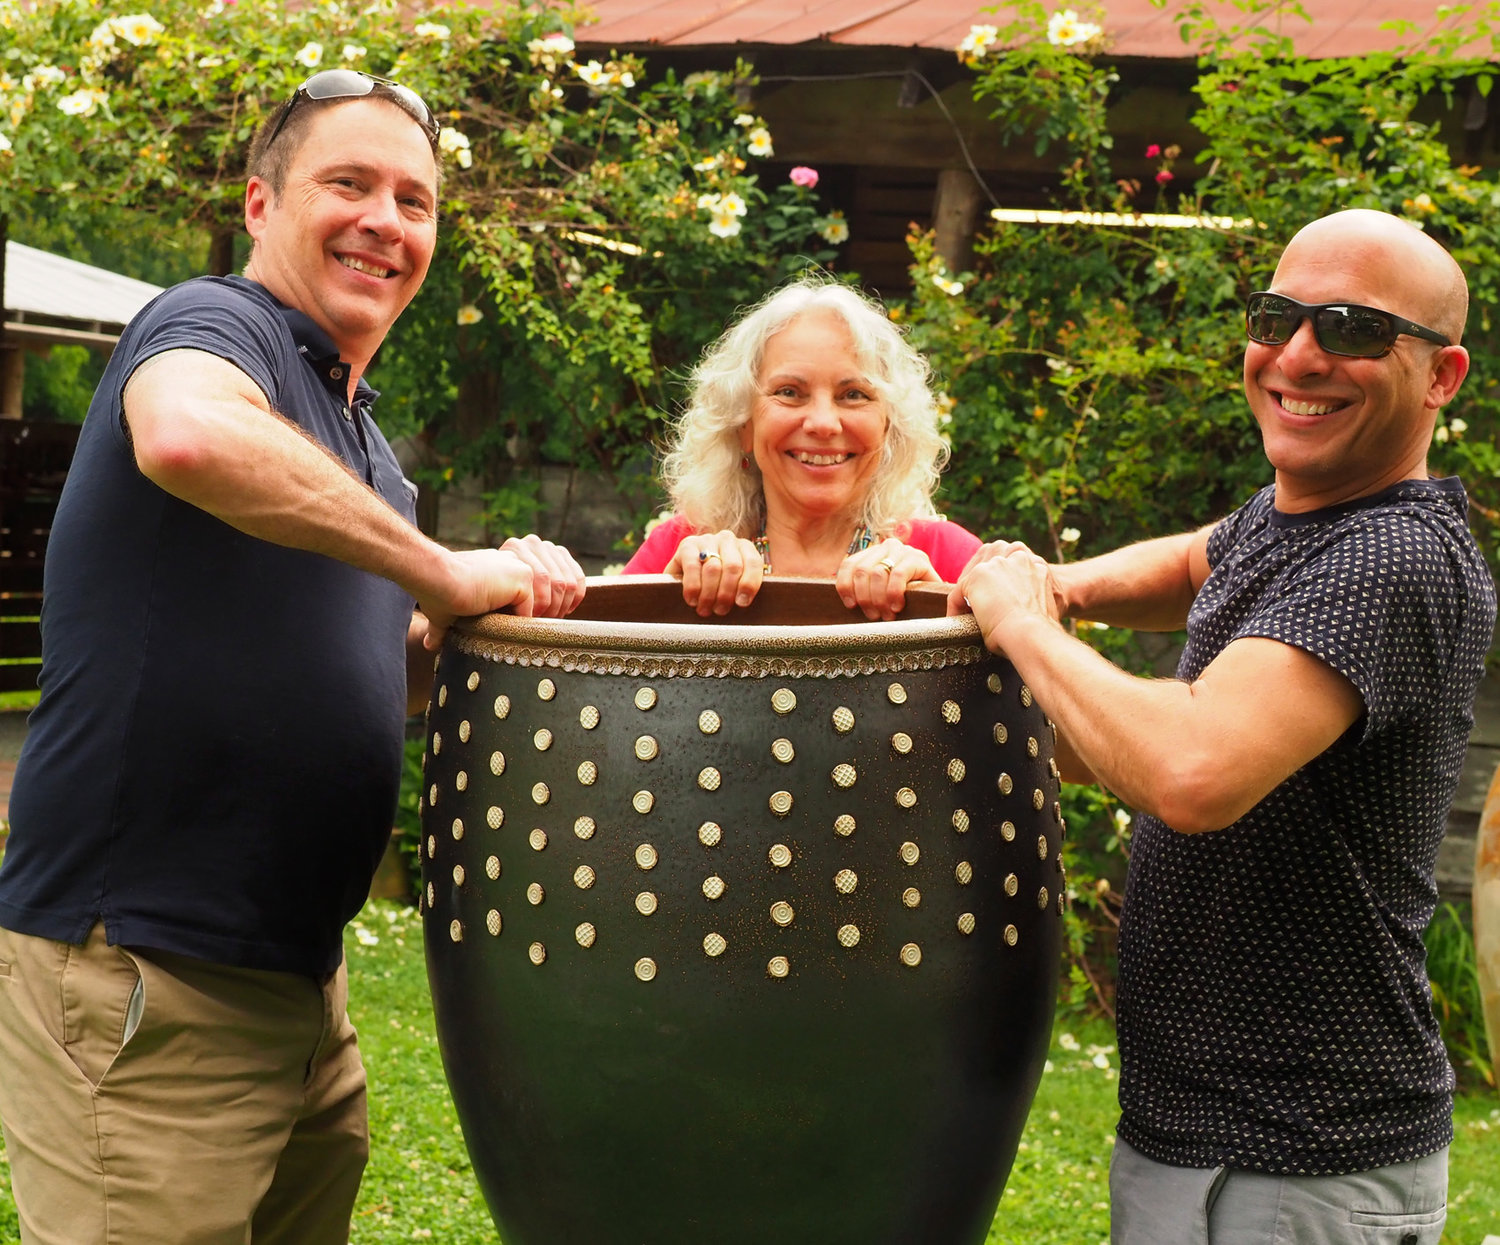 Brian Stratton and Jason Sandguist of Raleigh with Carol Hewitt, posing in pottery near the kiln's opening.